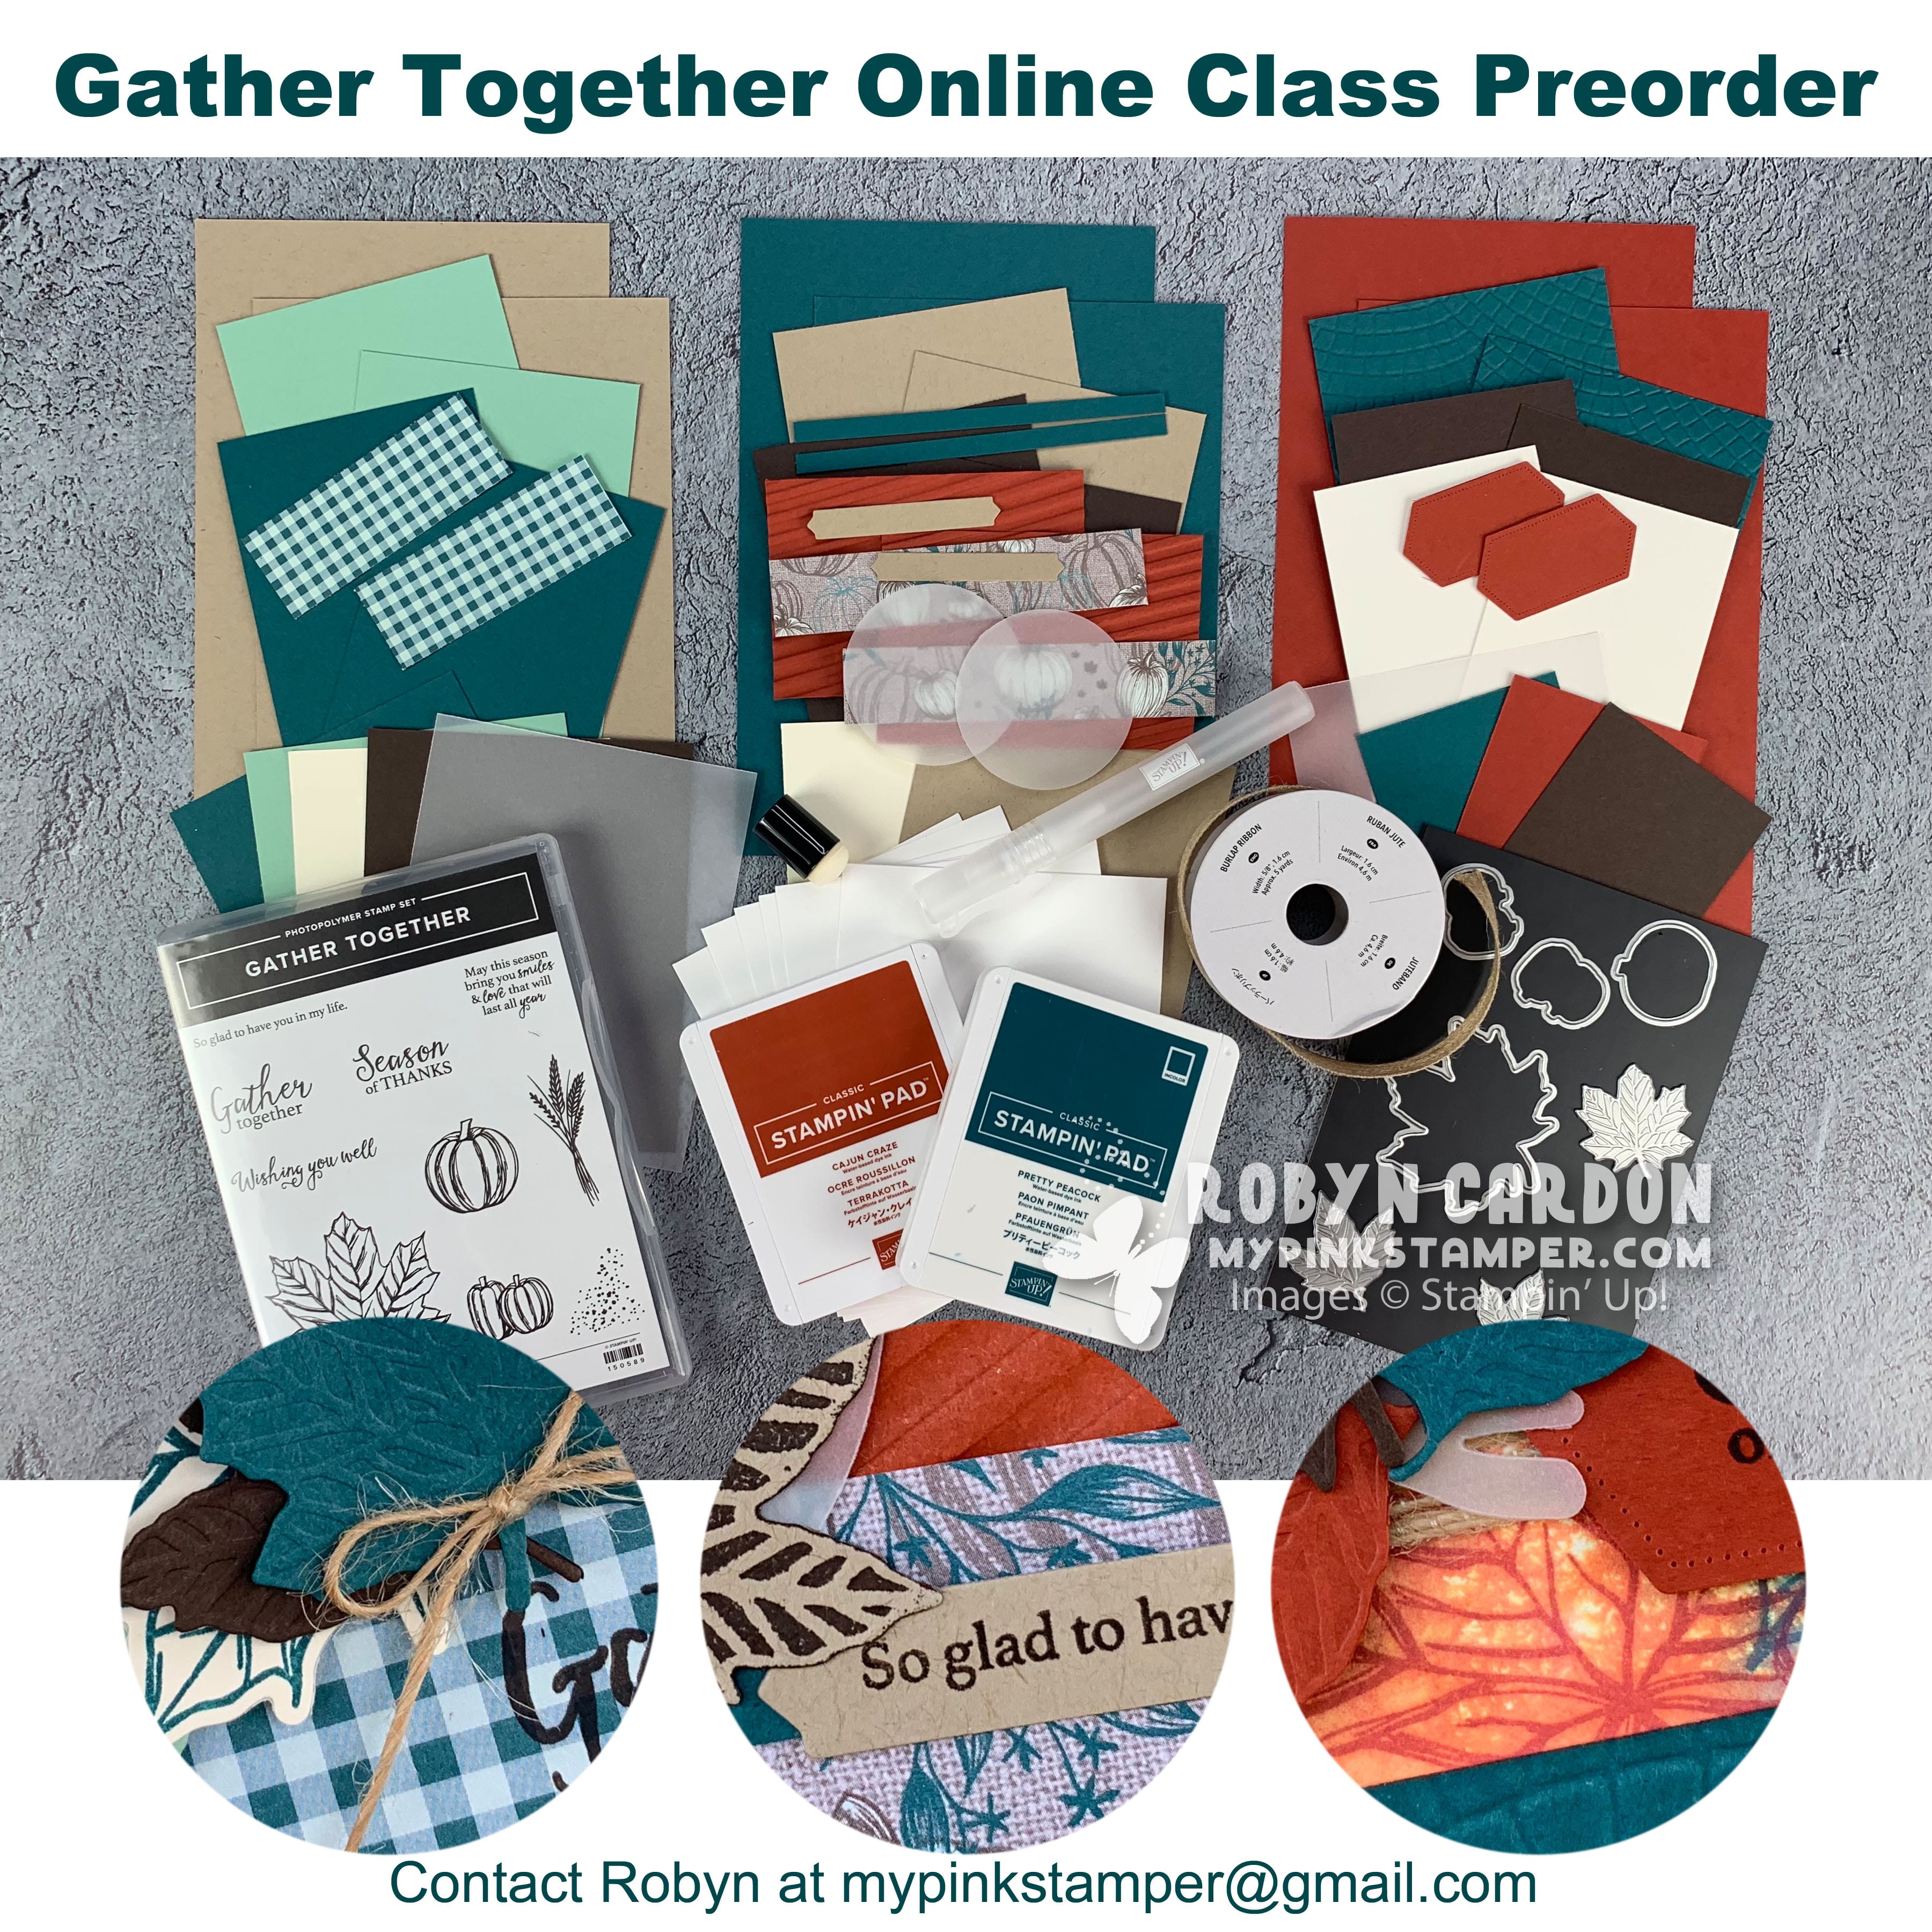 Gather Together Online Class Preorder